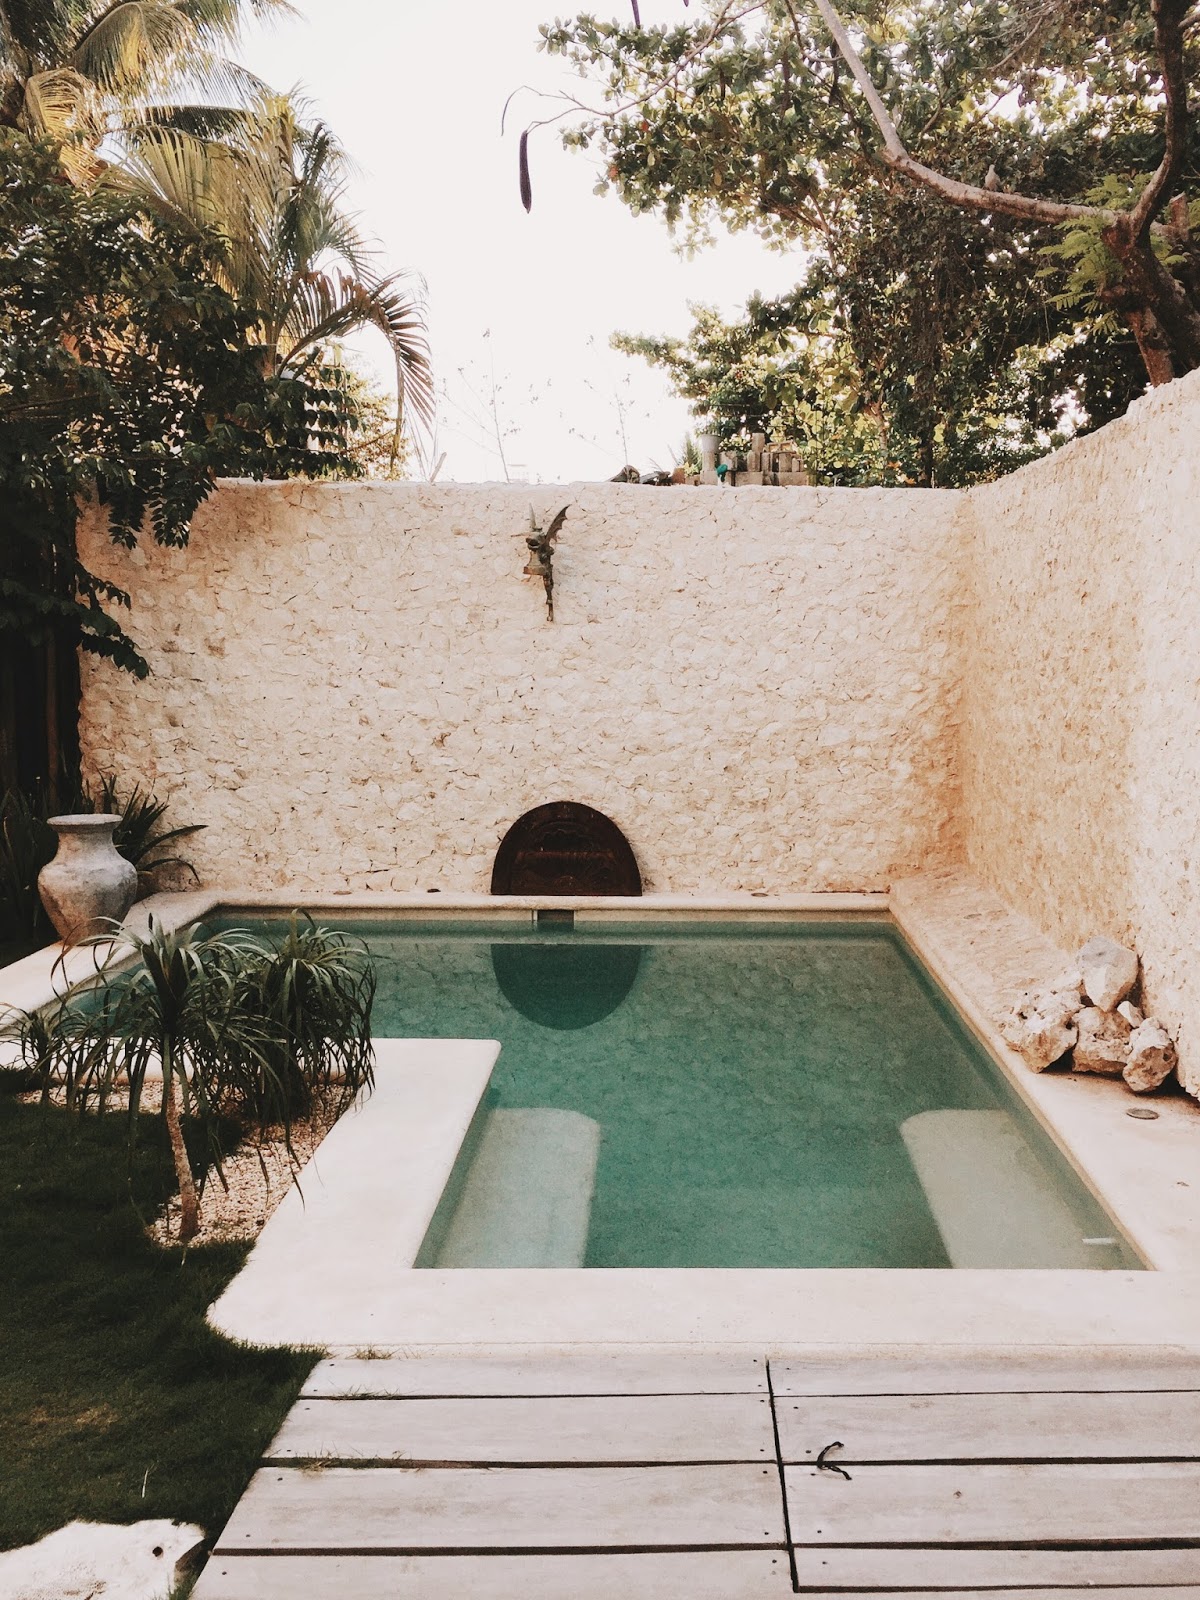 Where You Should Stay In Tulum